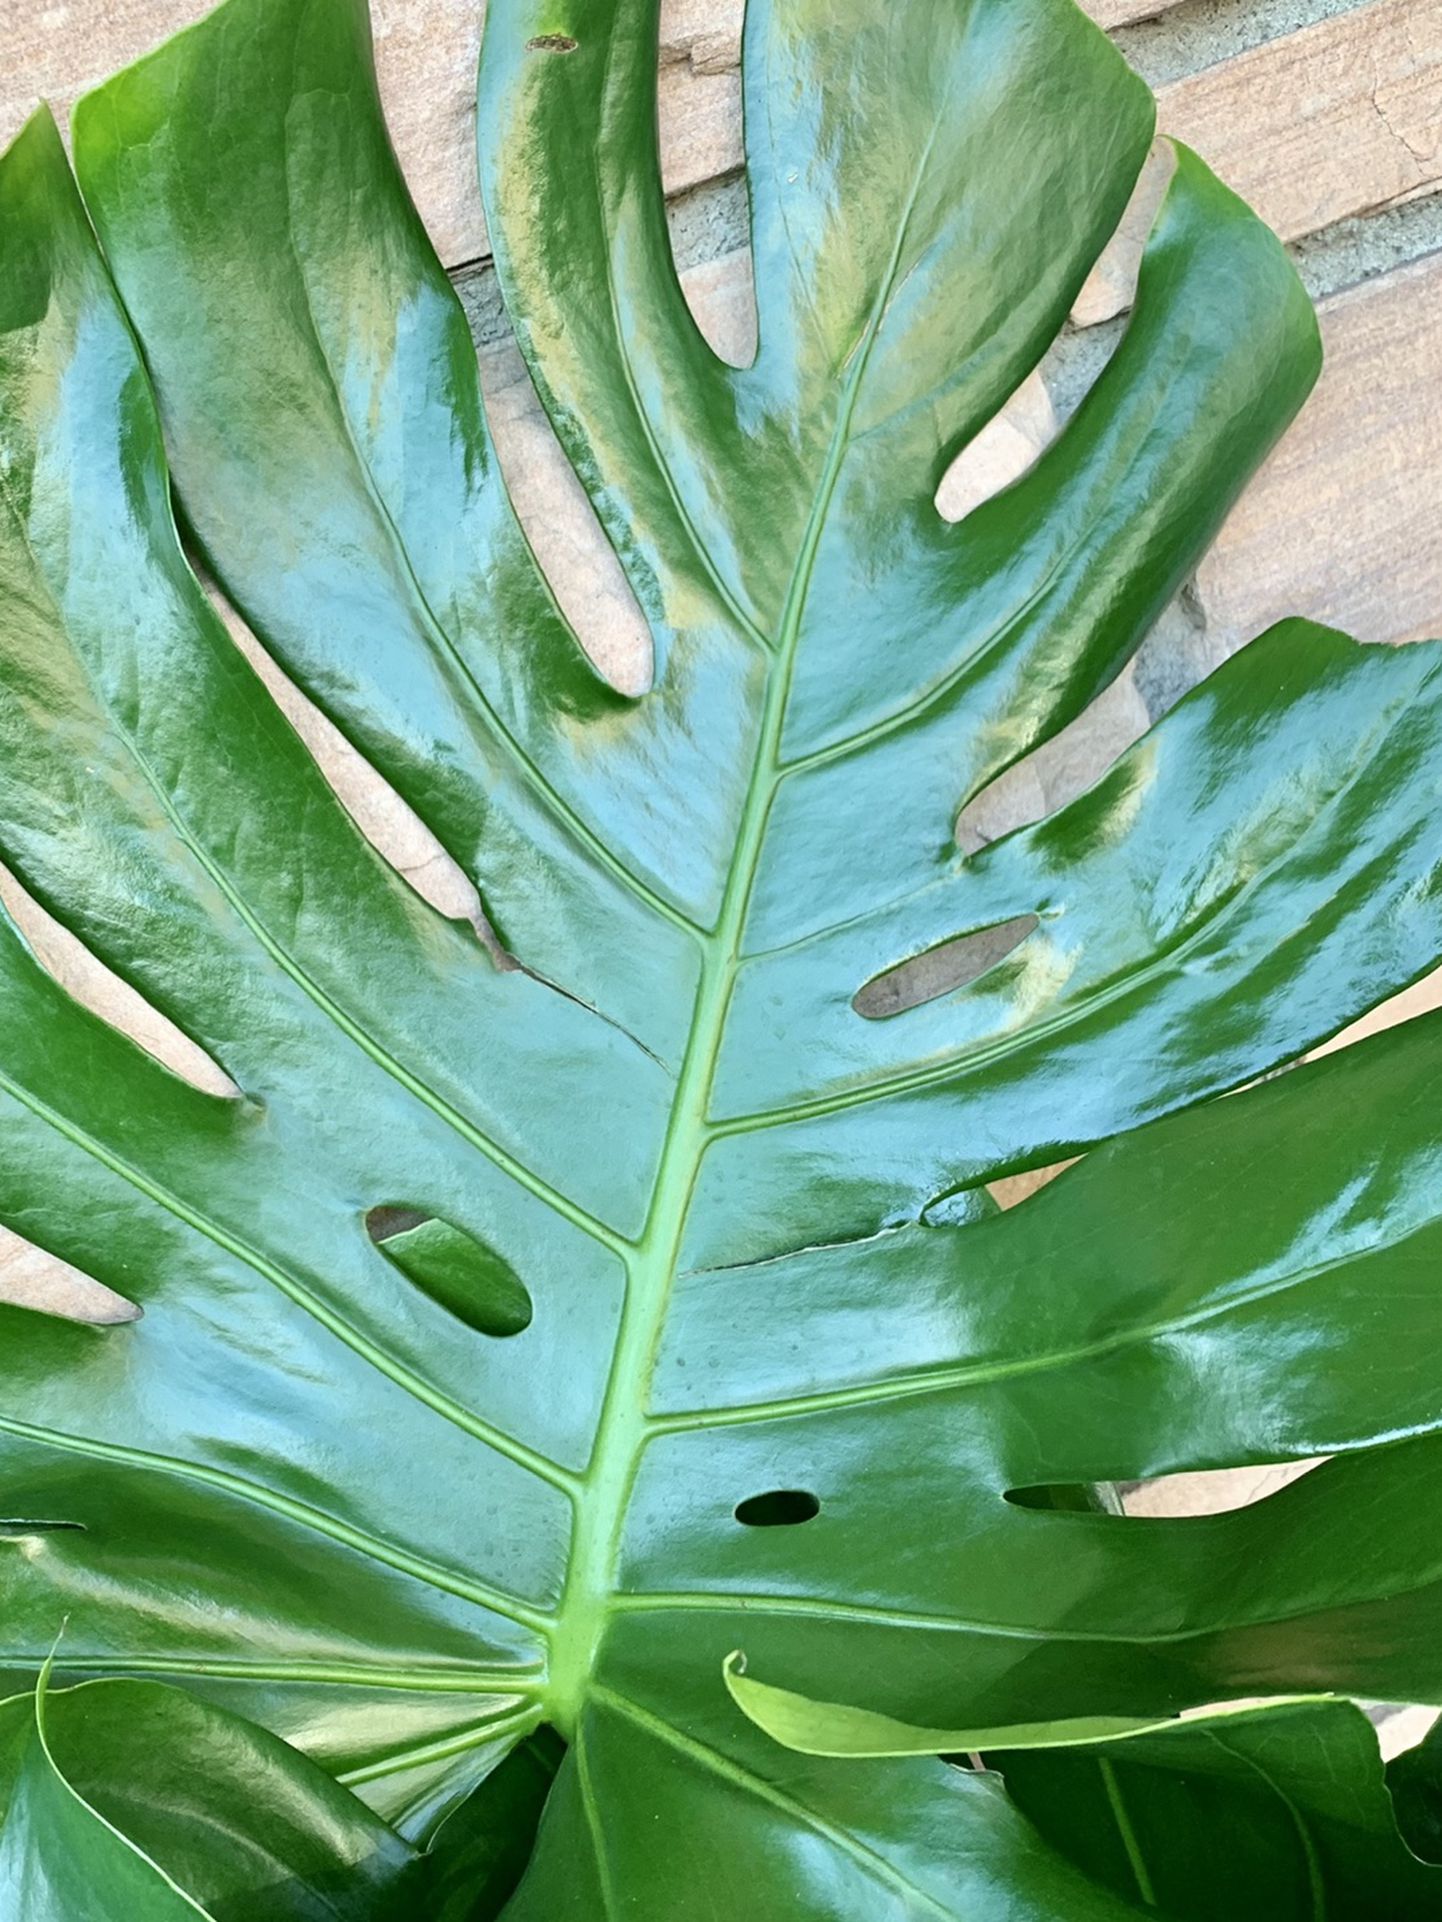 Gigante Monstera Leaves And Pot 4-5 Feet Big